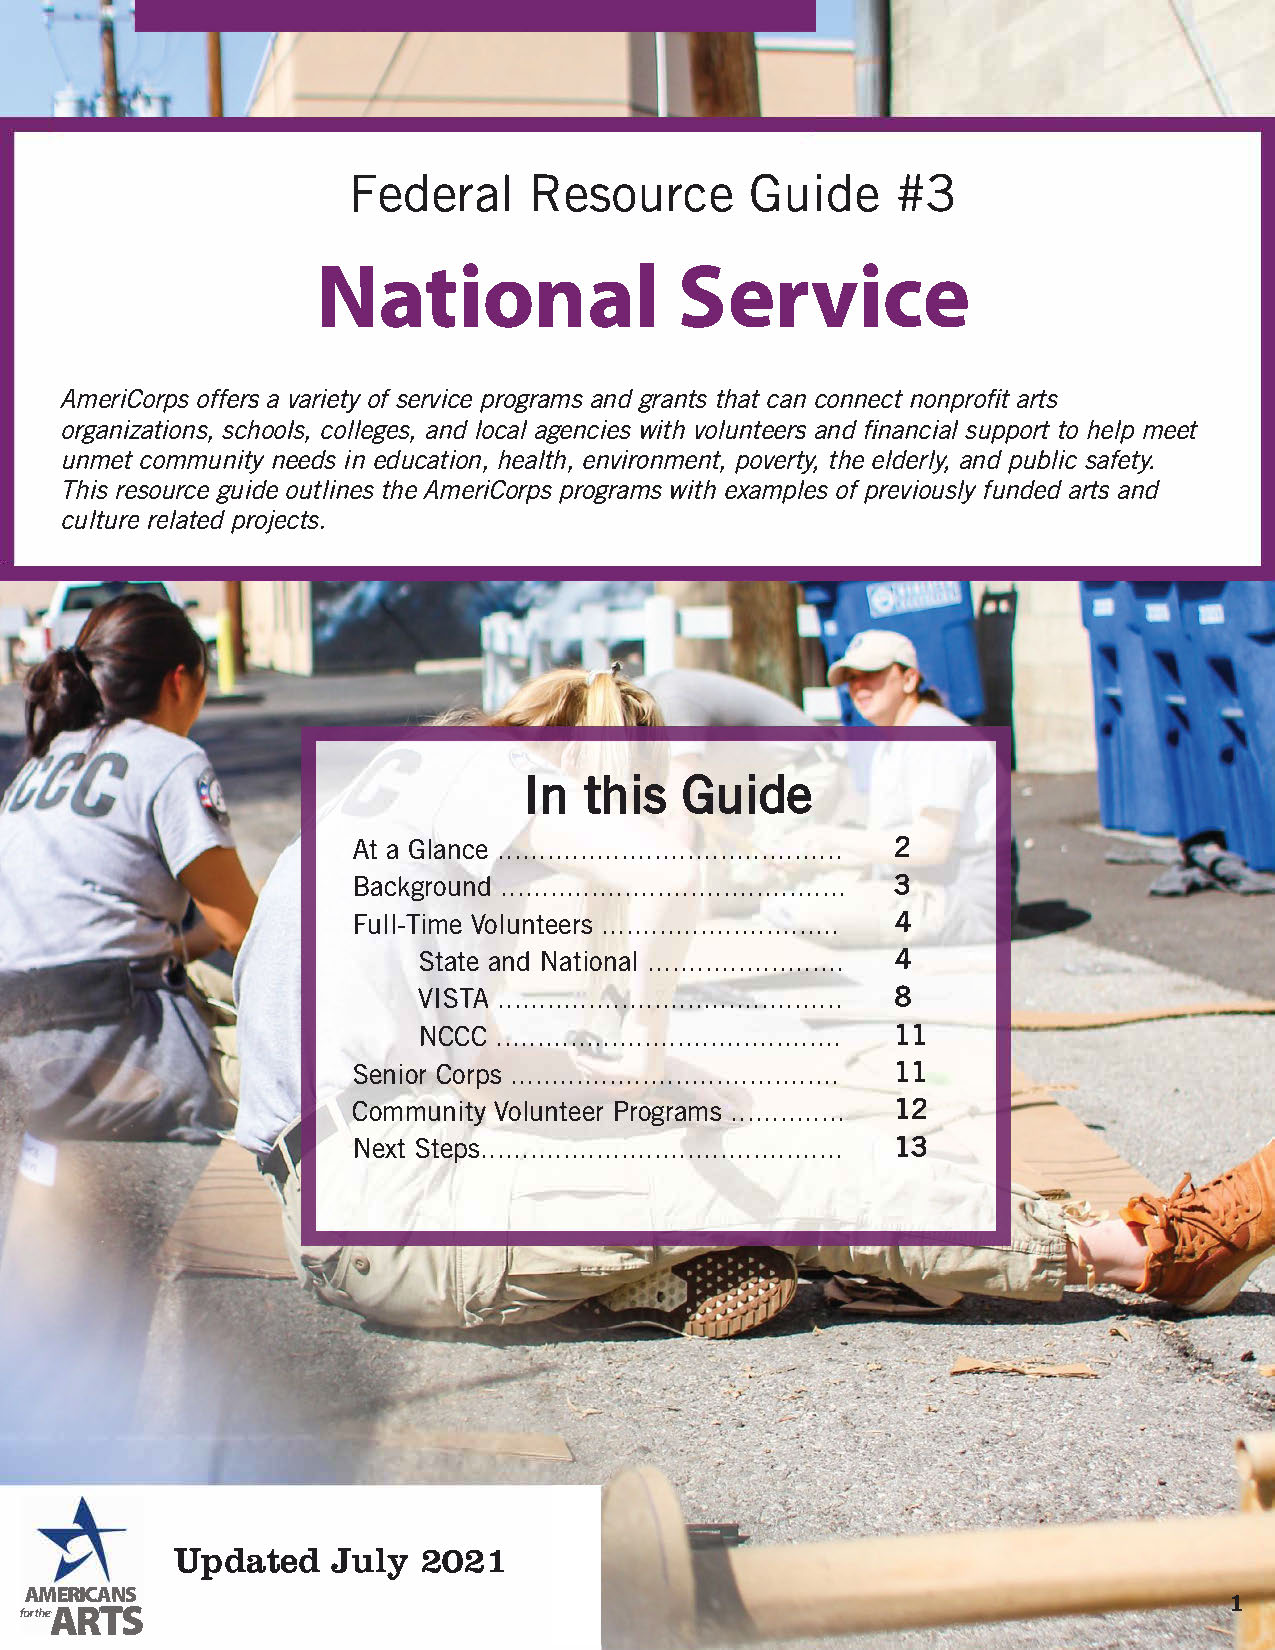 A thumnail cover image of the National Service guide, featuring an image of a group of people working on a wood project in an alley